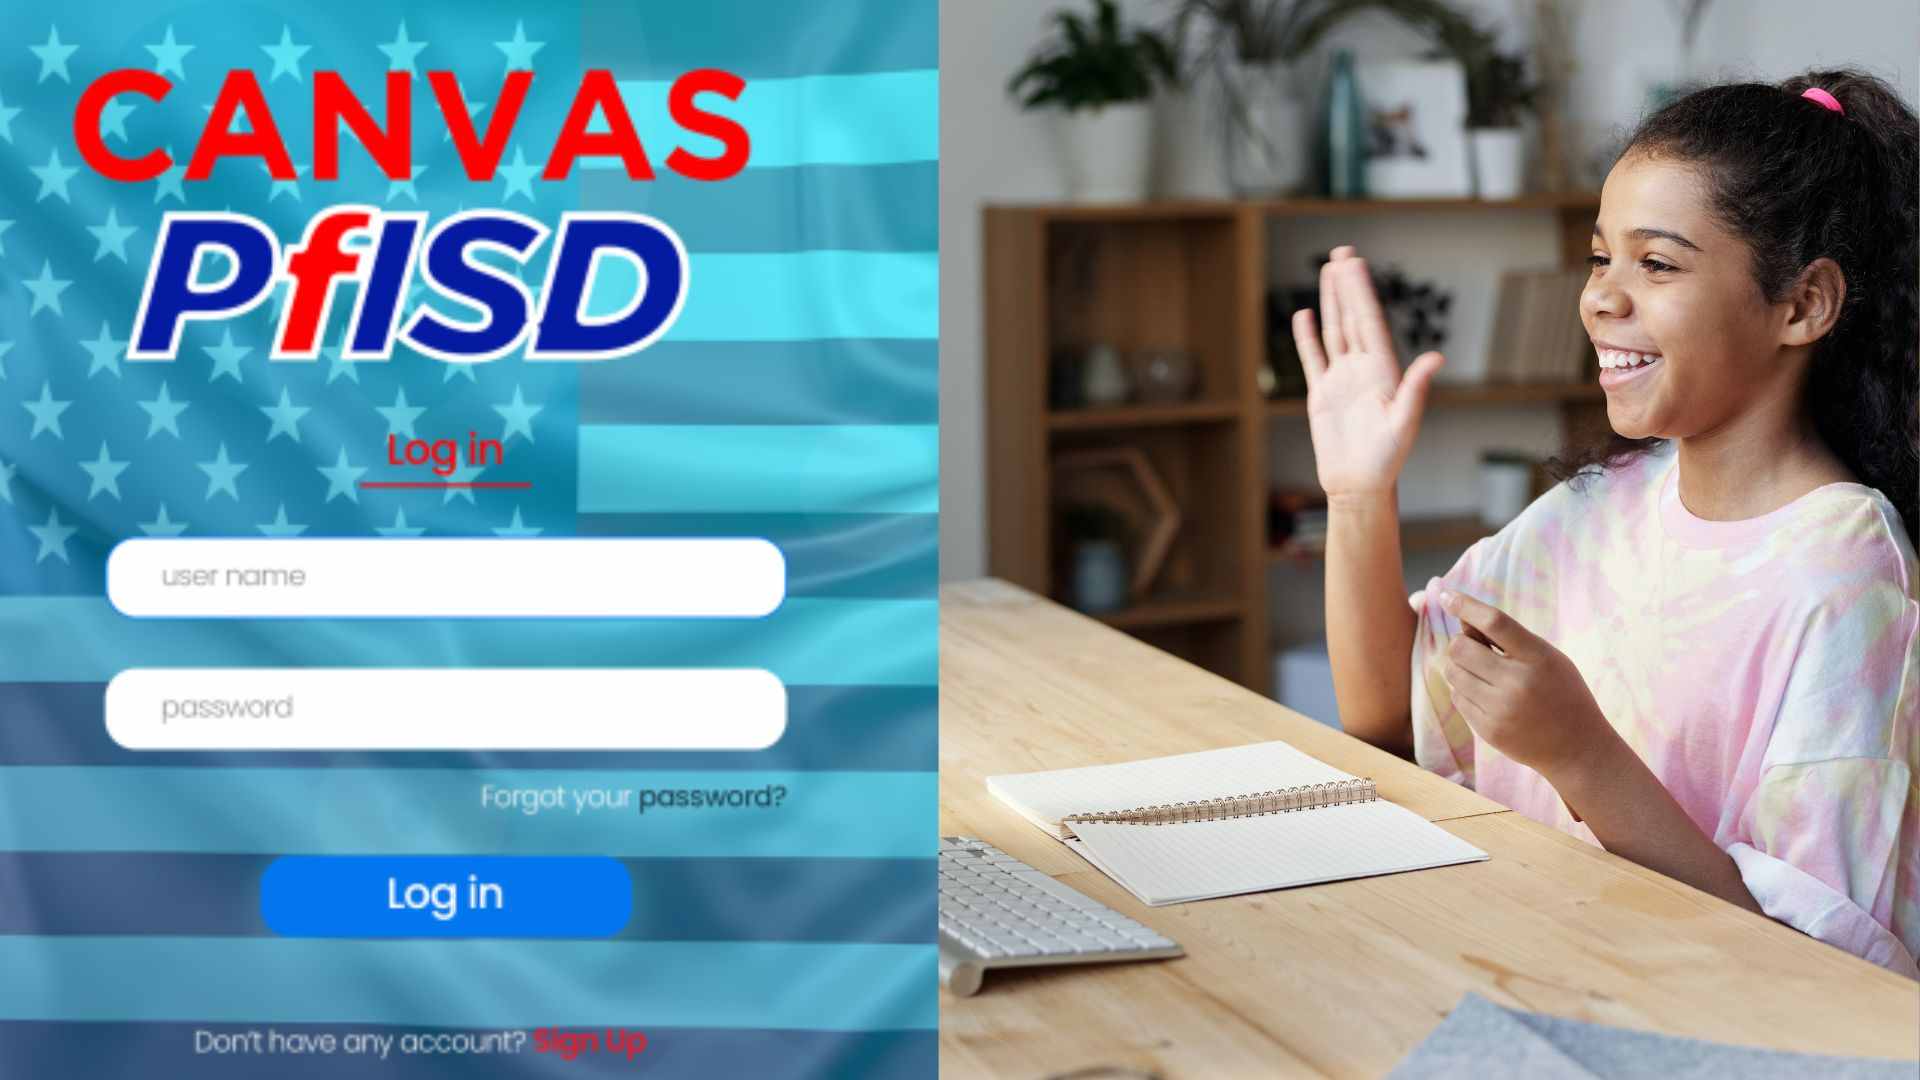 Canvas Pfisd Online Learning Management System